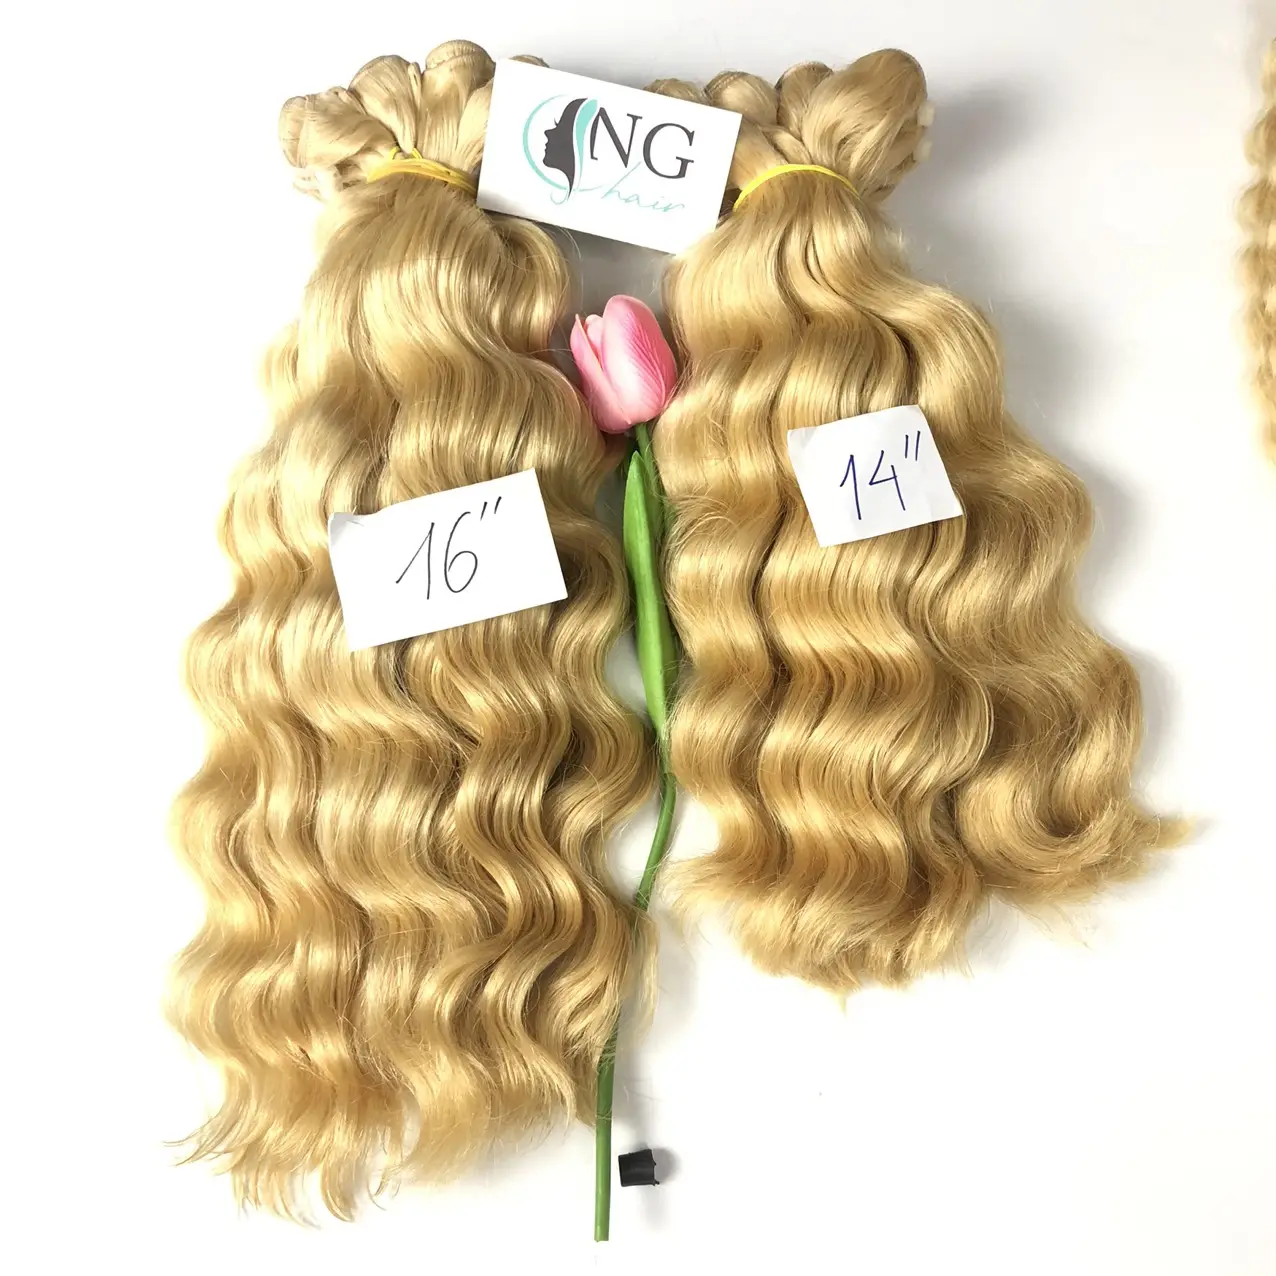 Wholesale 100% Vietnamese Human Hair Best Cheap Wavy Weft Hair Extensions Full Color, Made In Vietnam.